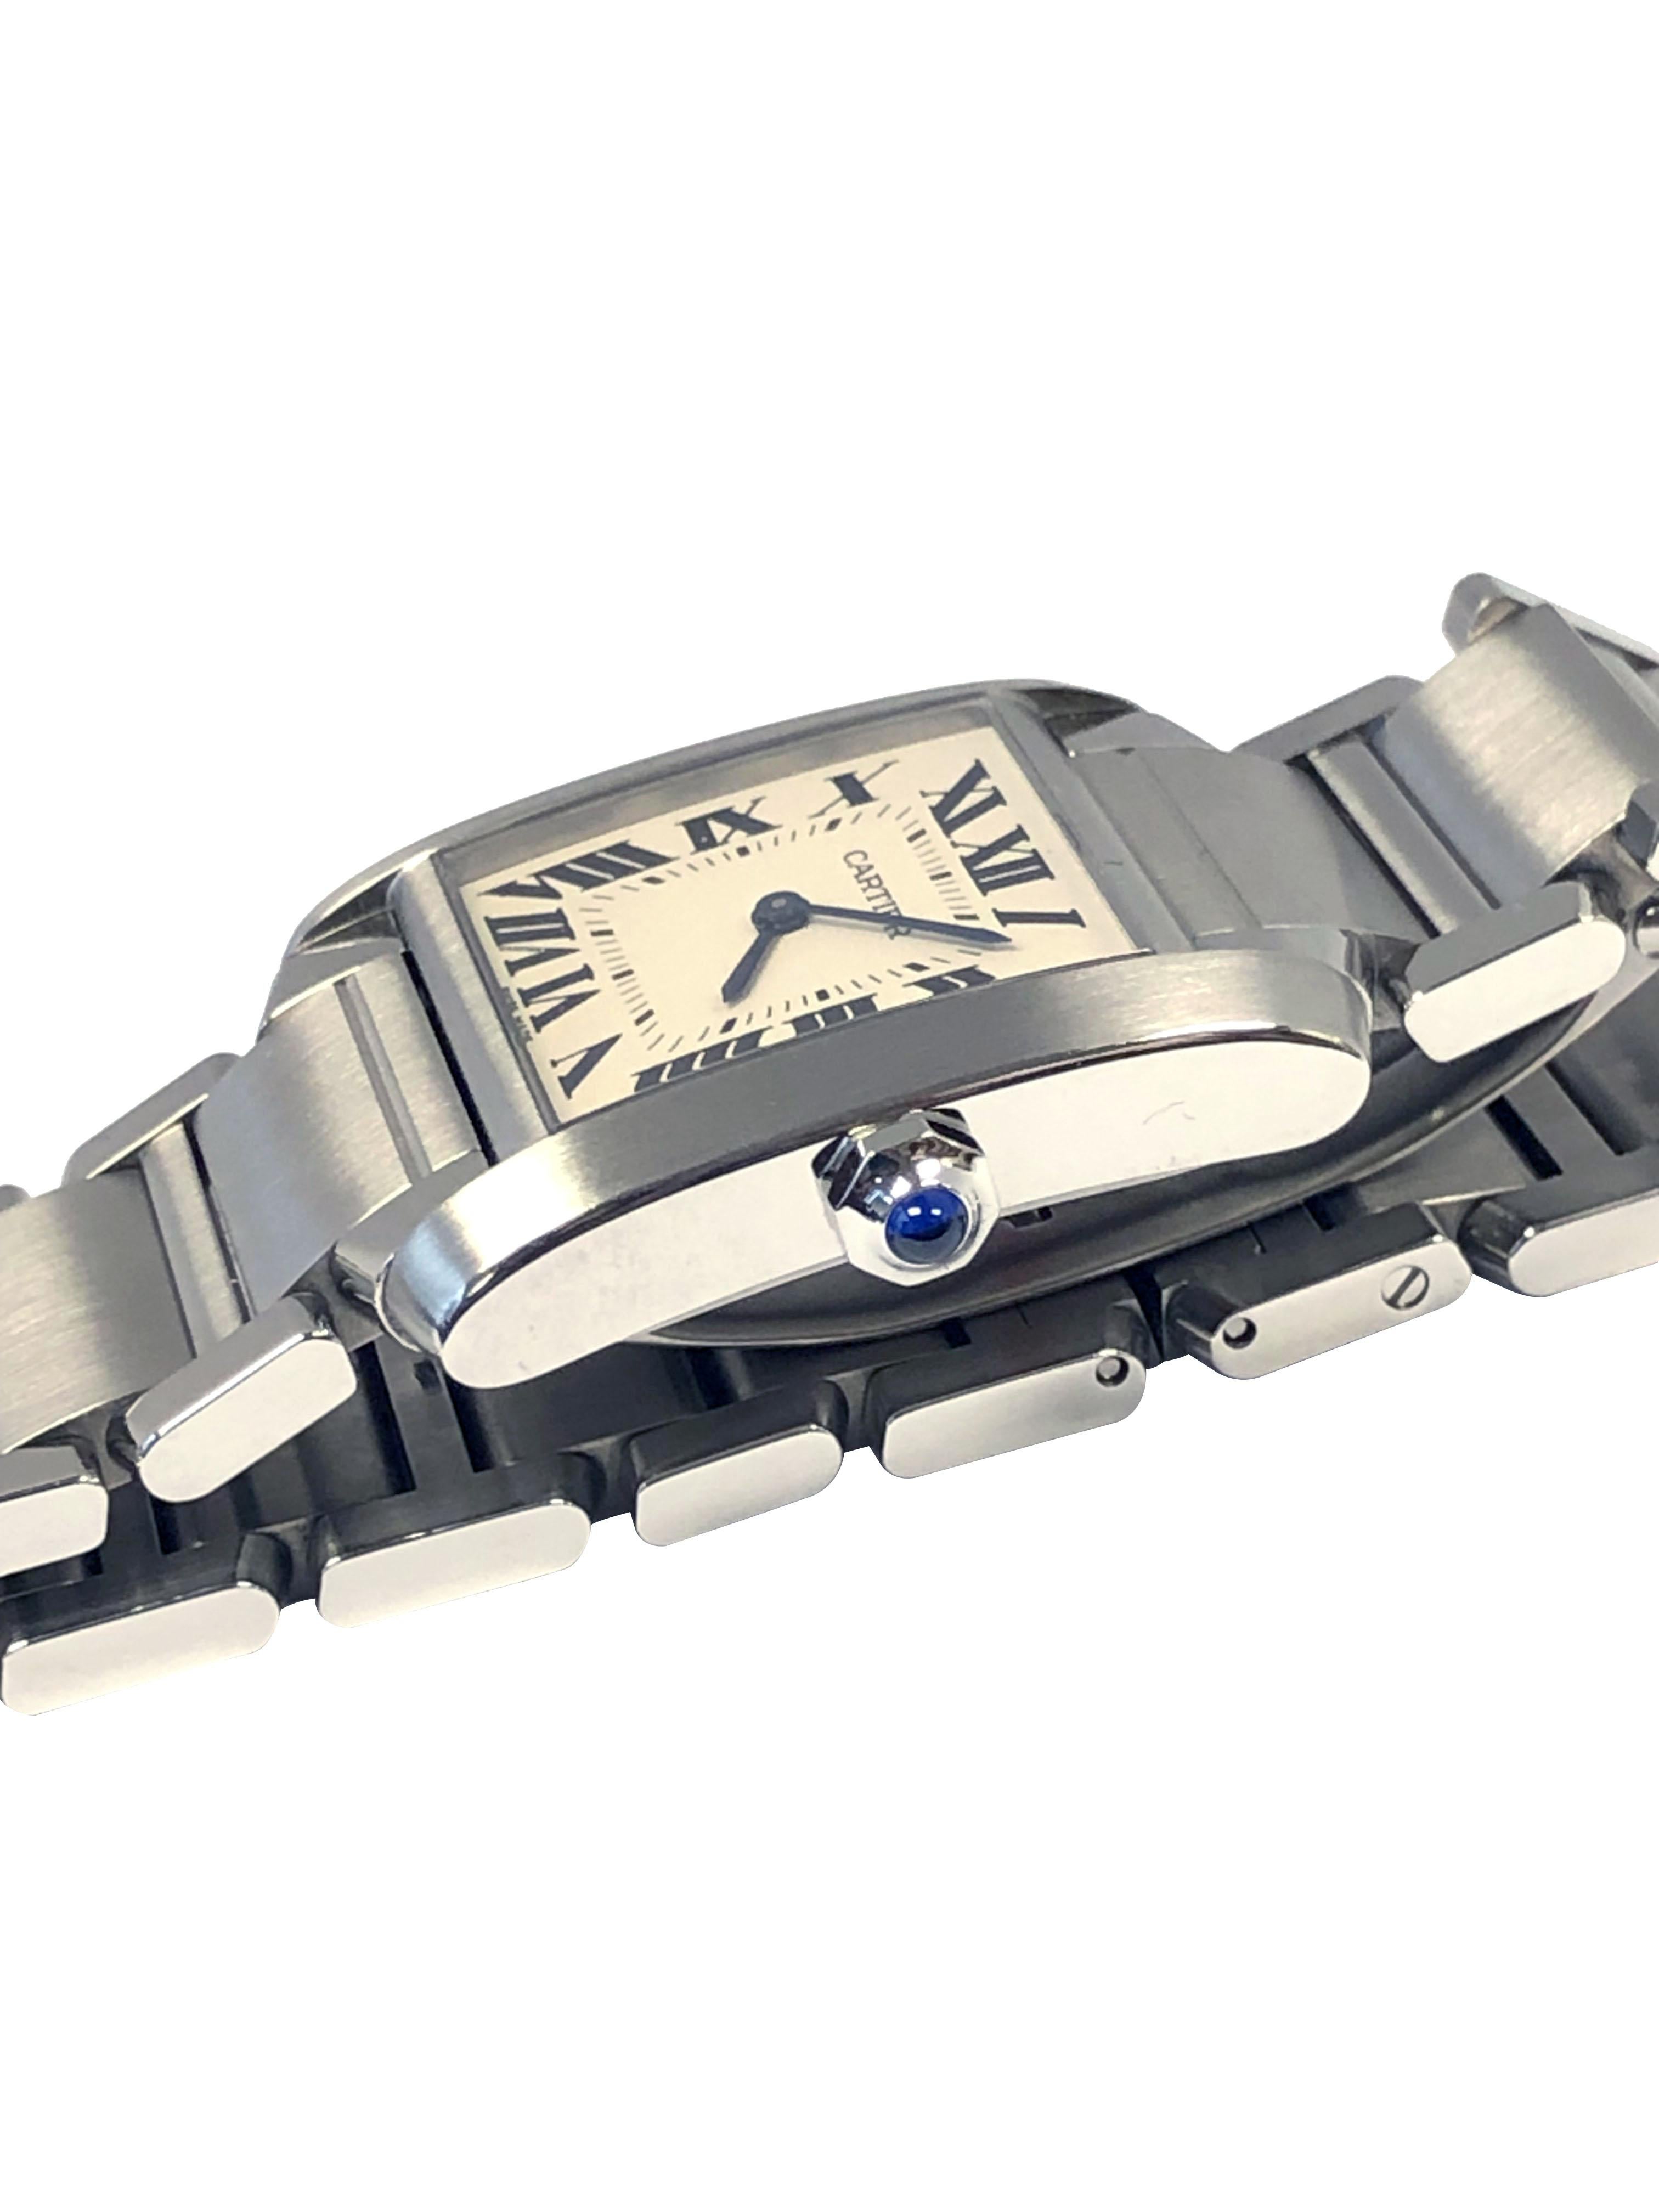 Circa 2015 Cartier Tank Francaise Mid Size Wrist Watch, 25 x 20 M.M. Stainless Steel Water Resistant Case. Quartz Movement, Silvered White Dial with Black Roman Numerals, Sapphire Crown. 5/8 inch wide Francaise Bracelet with fold over Deployment